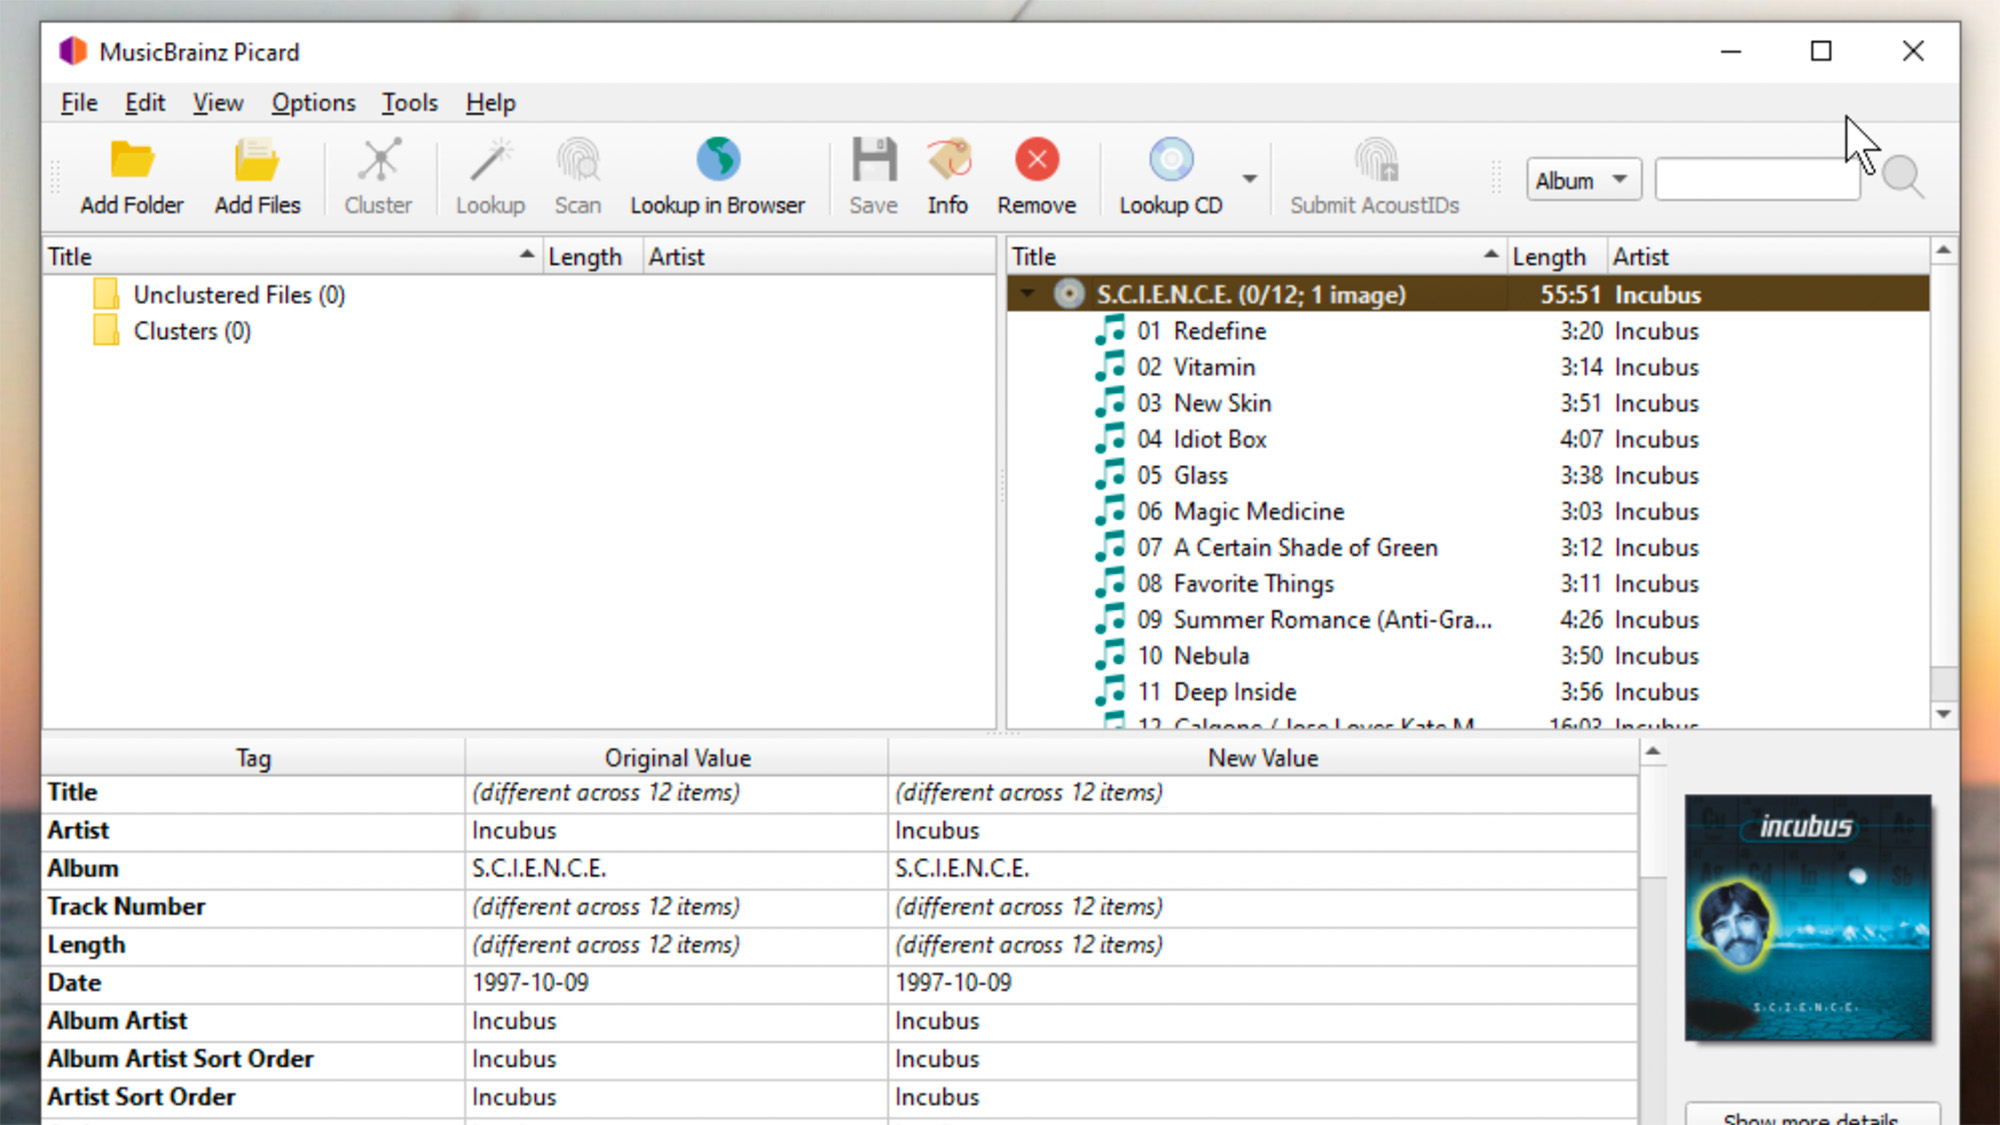 Use MusicBrainz Picard to organize your sloppy music collection